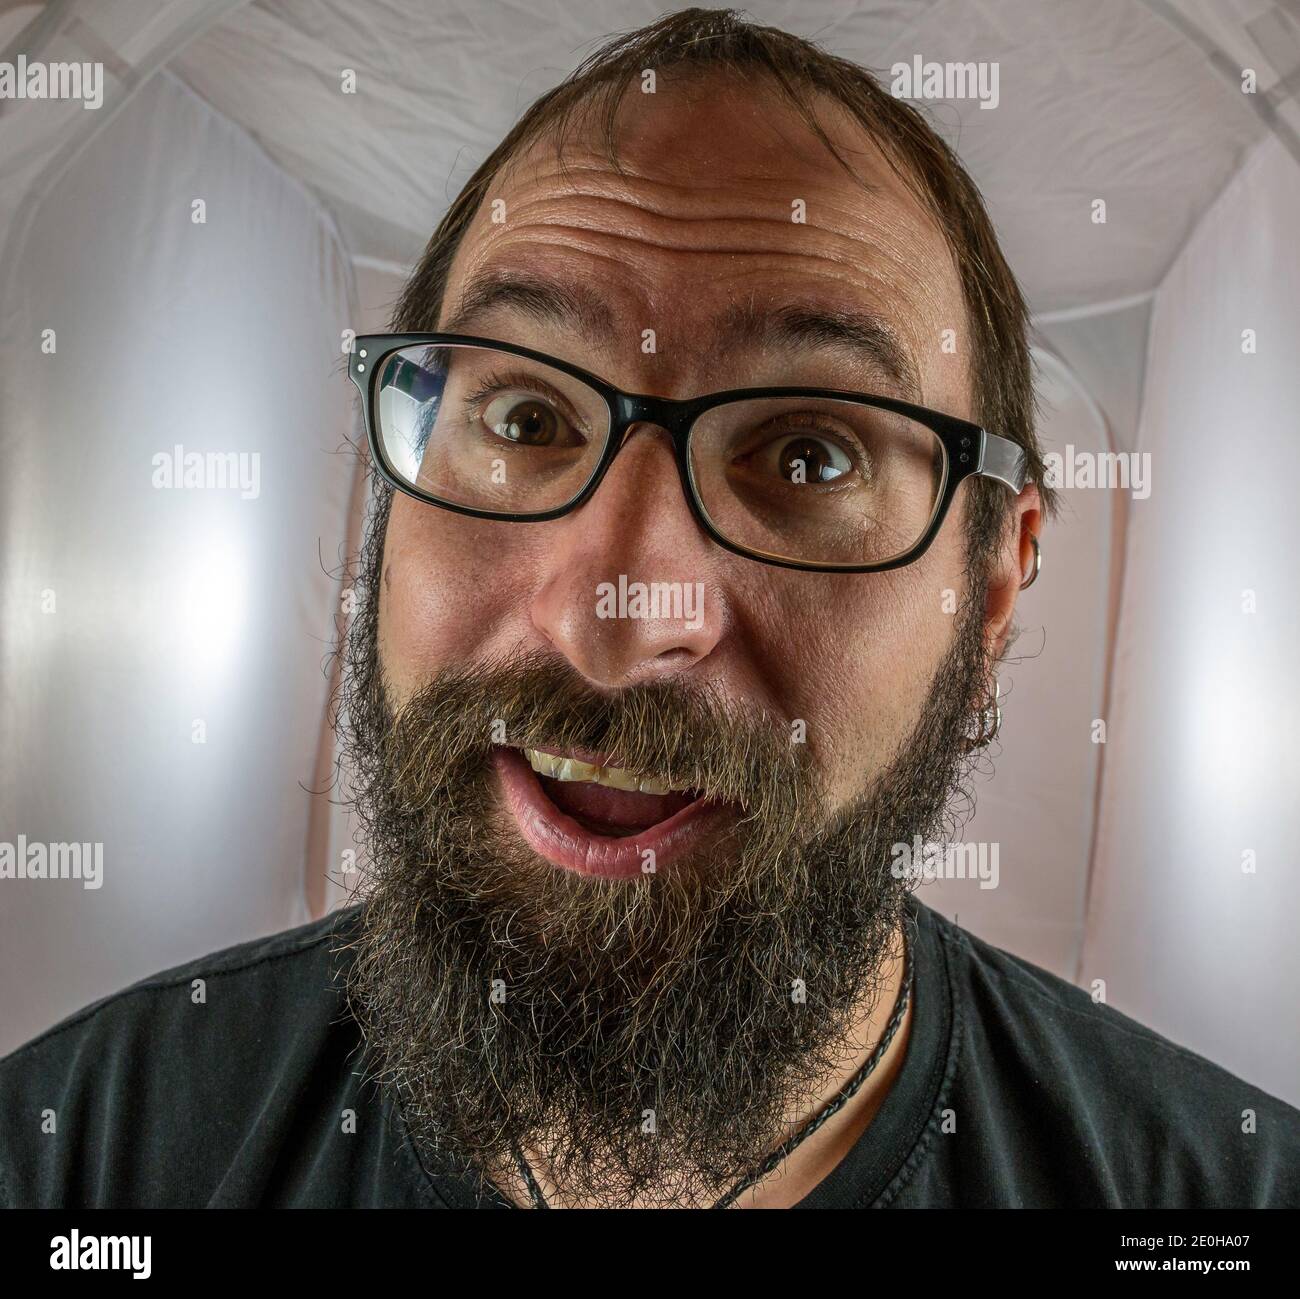 A surprised looking bearded man with glasses Stock Photo